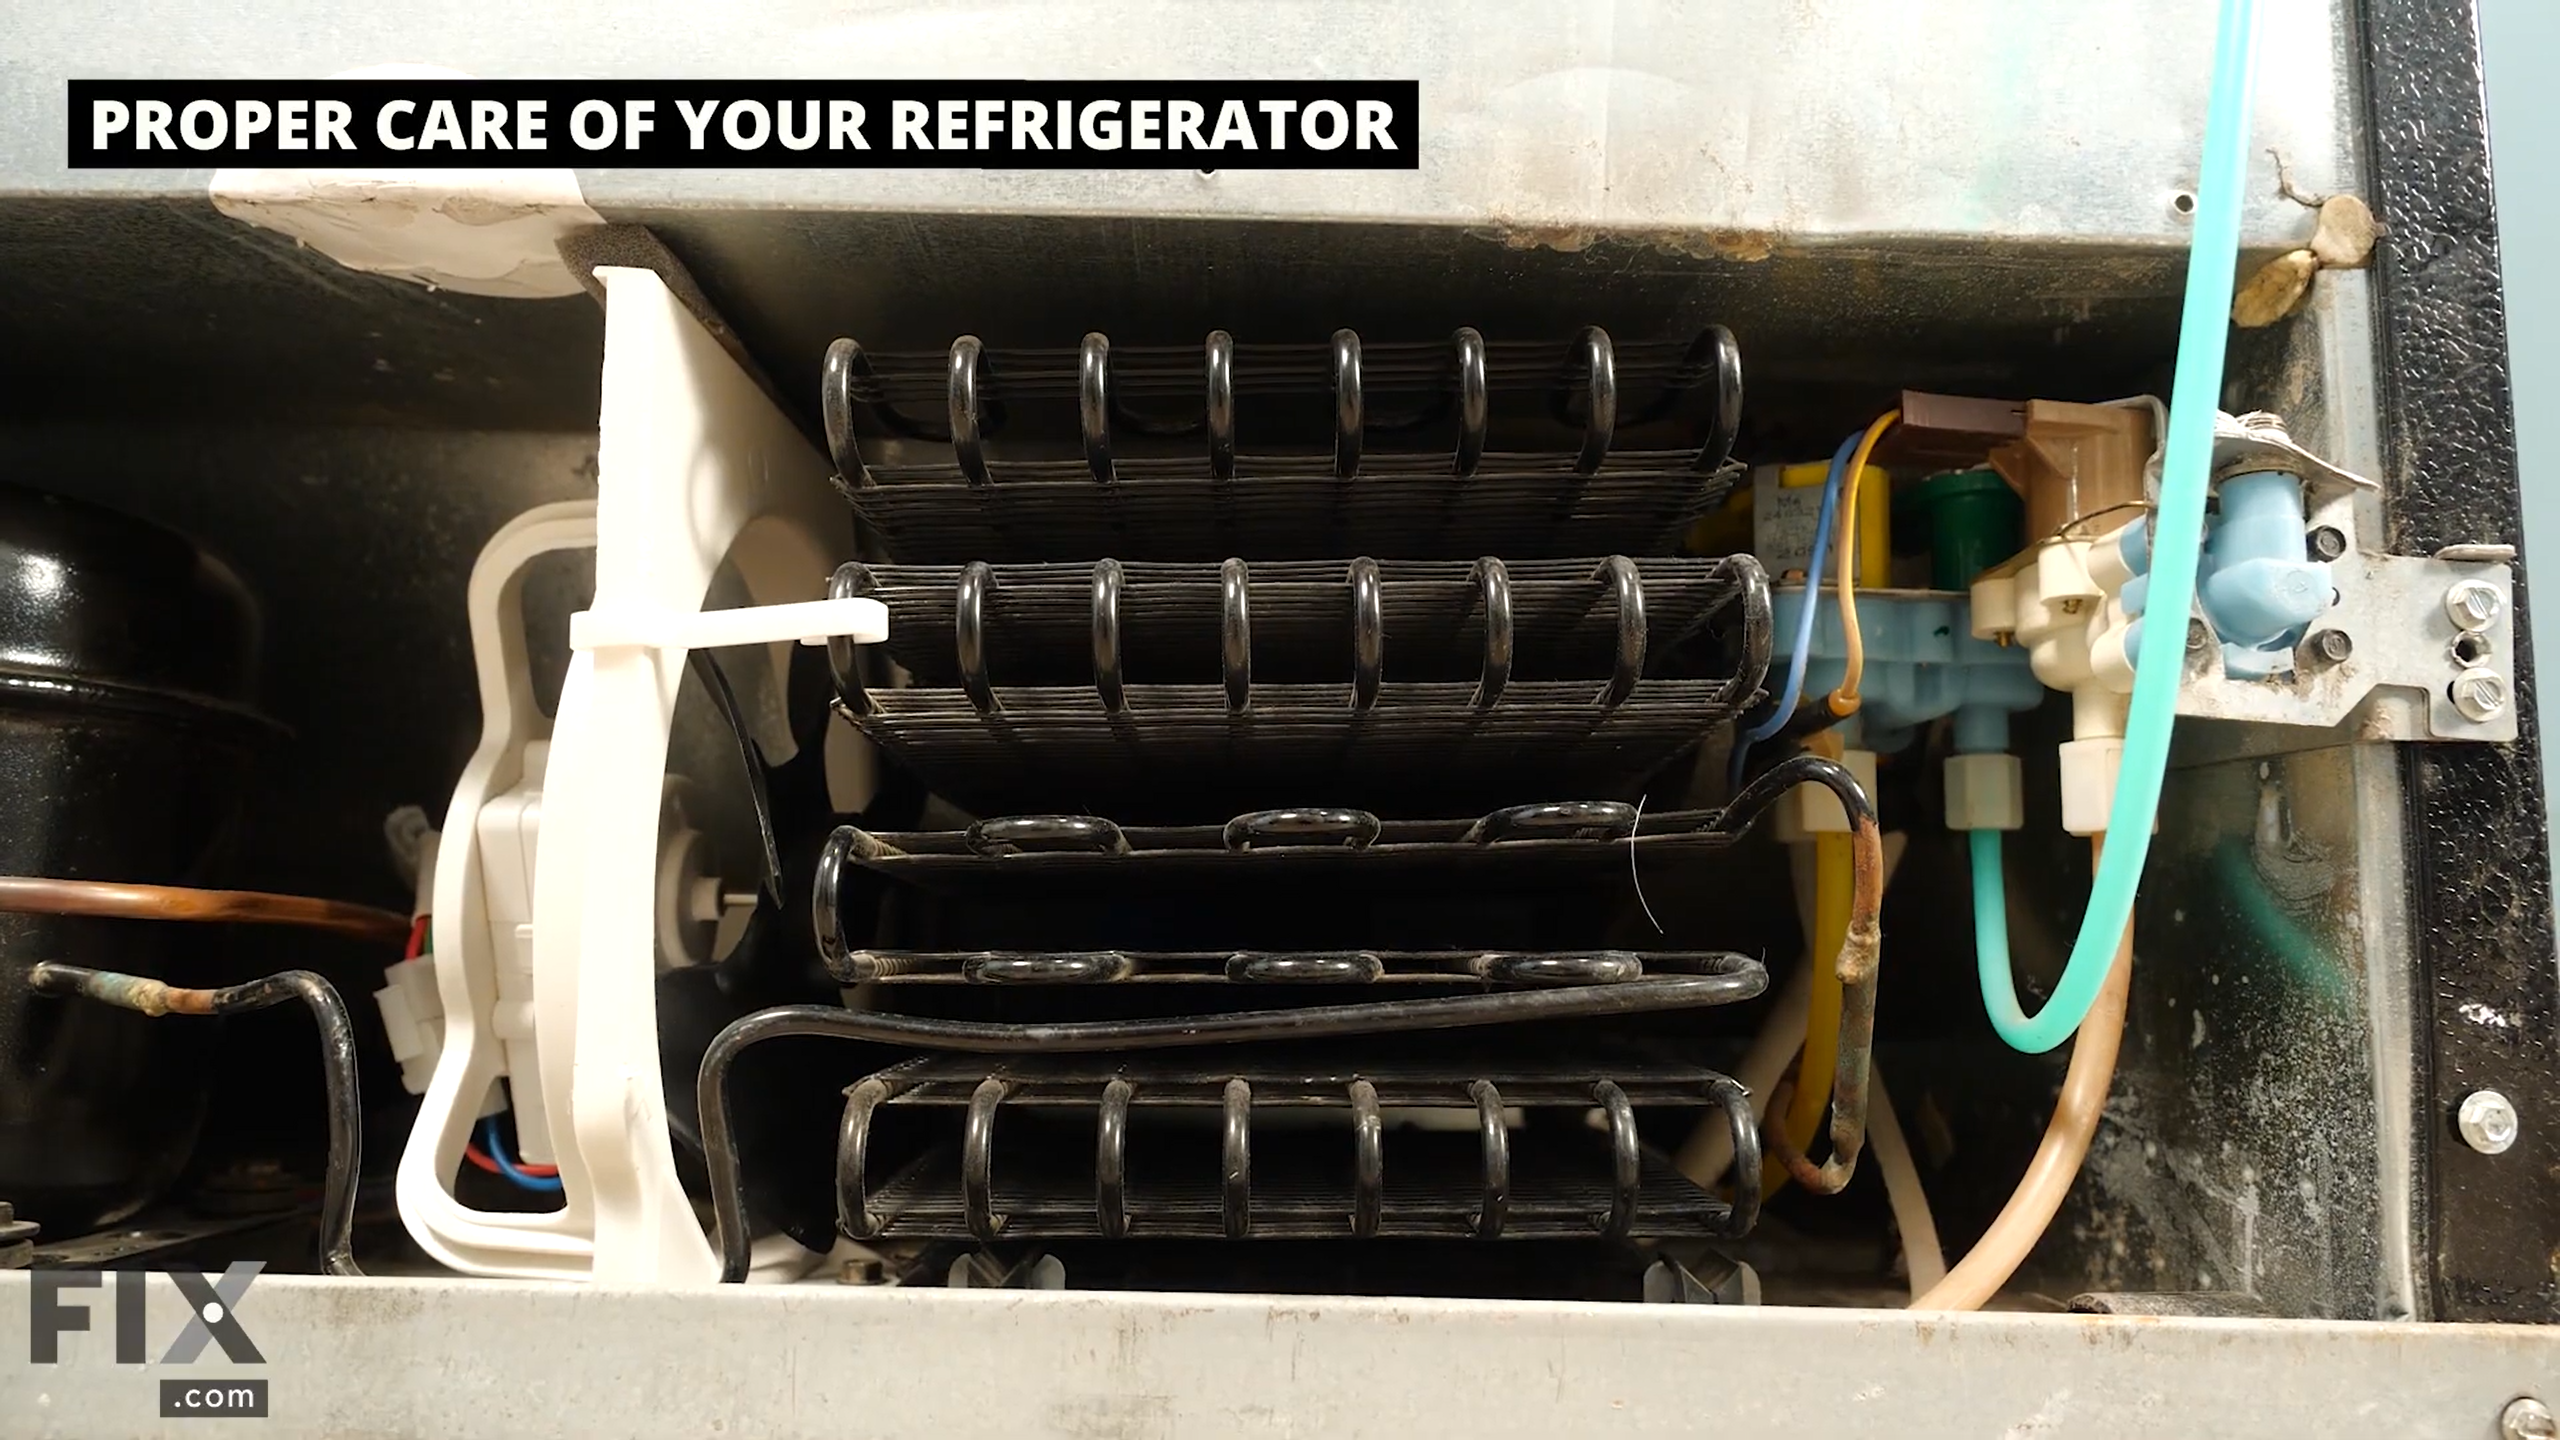 Looking into the back of a refrigerator, with metal coils, compressor and tubing assembly visible.